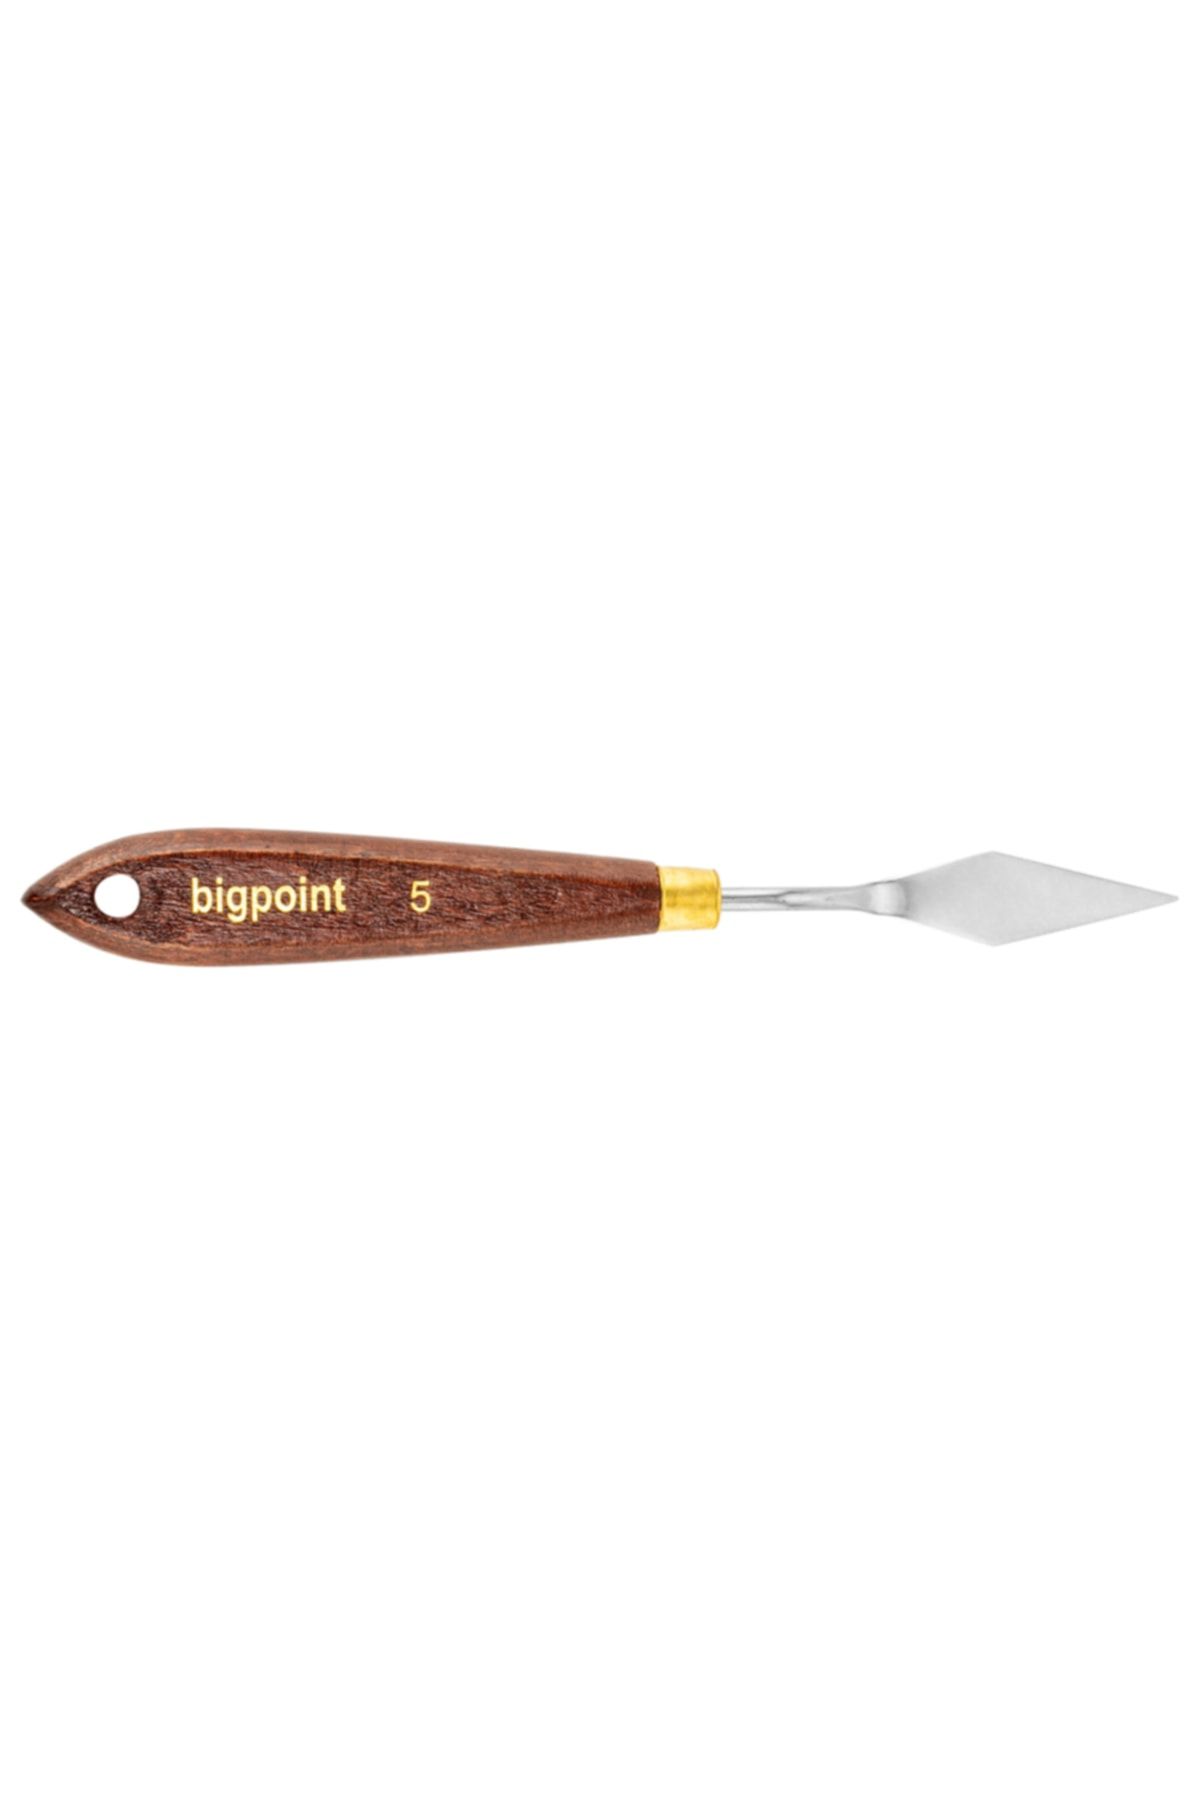 Bigpoint Metal Spatula No: 5 (painting Knife)